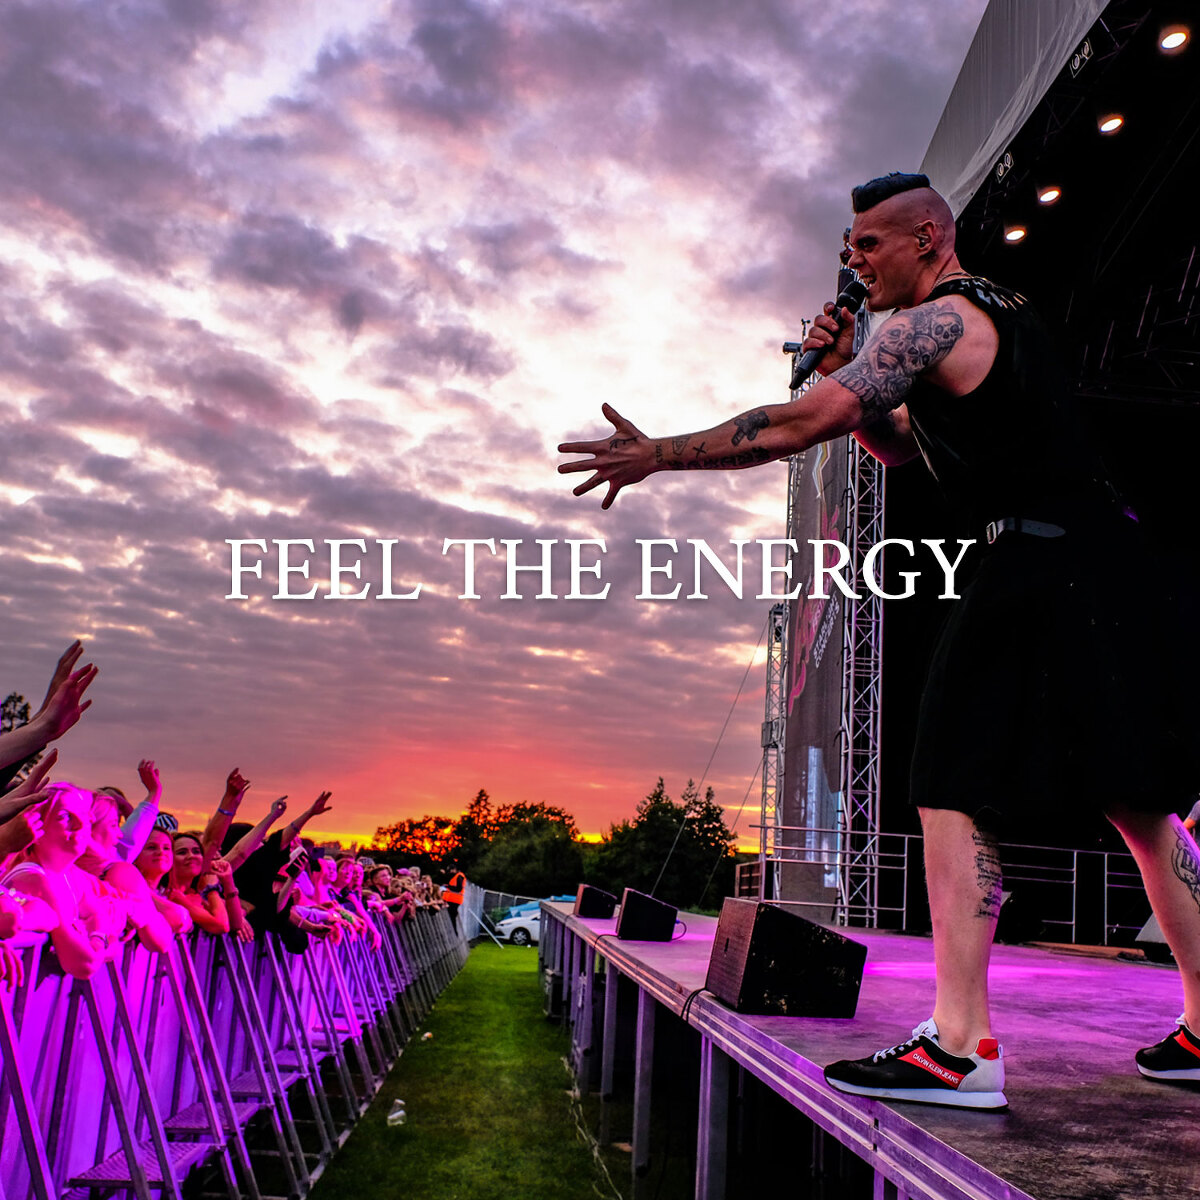 Music and Event Photographer in Surrey - Feel the Energy